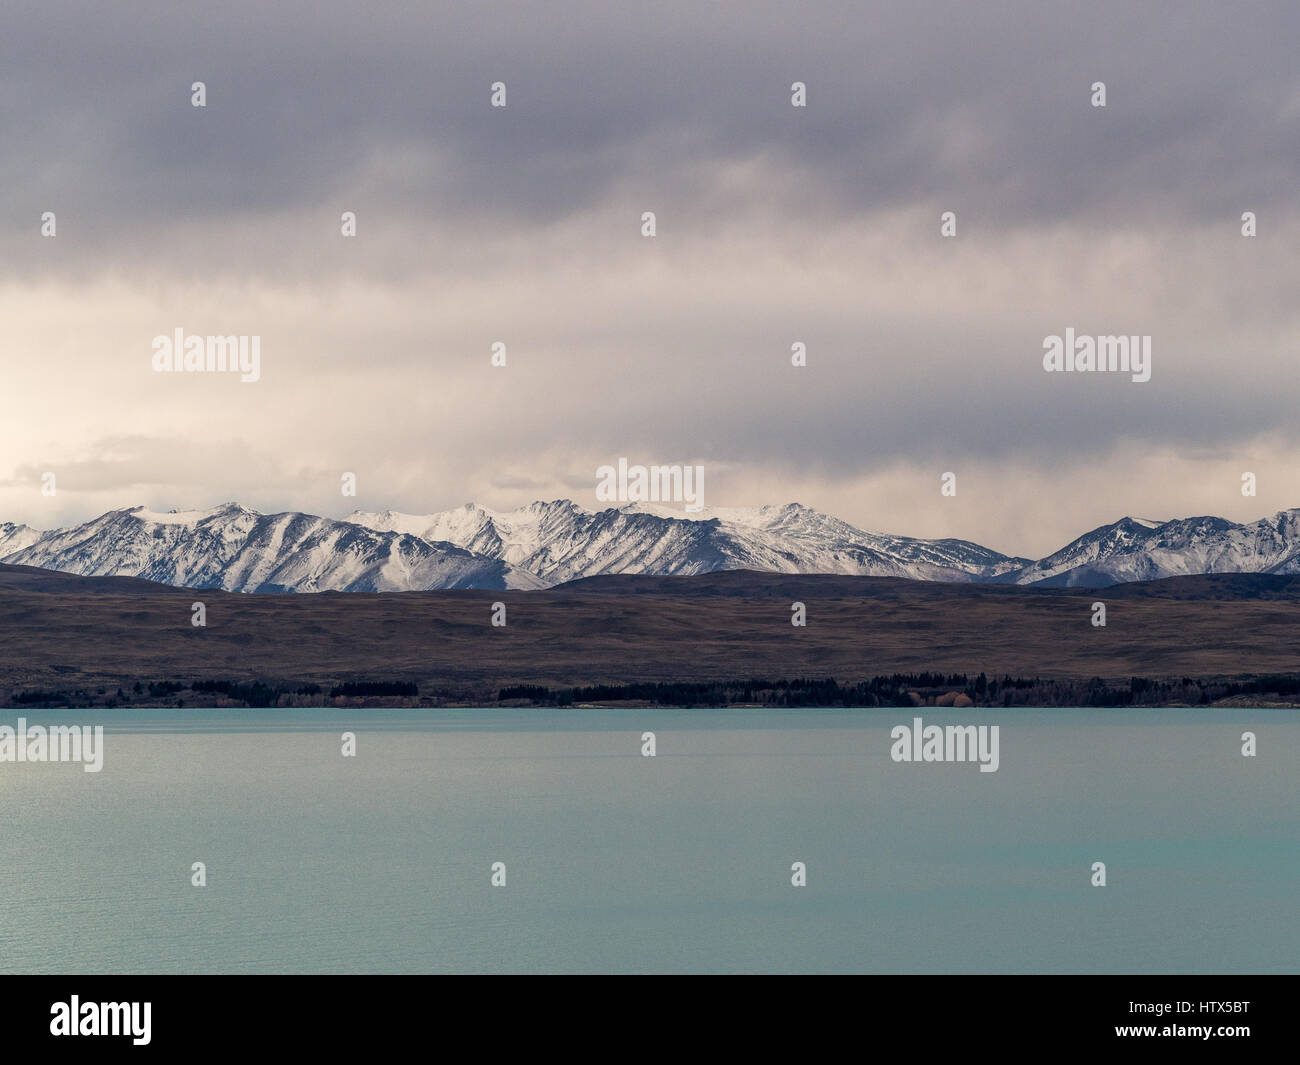 Alpine lake with view of mountains seen over water. Lake Pukaki, Mackenzie Country, South Island,  New Zealand. Stock Photo